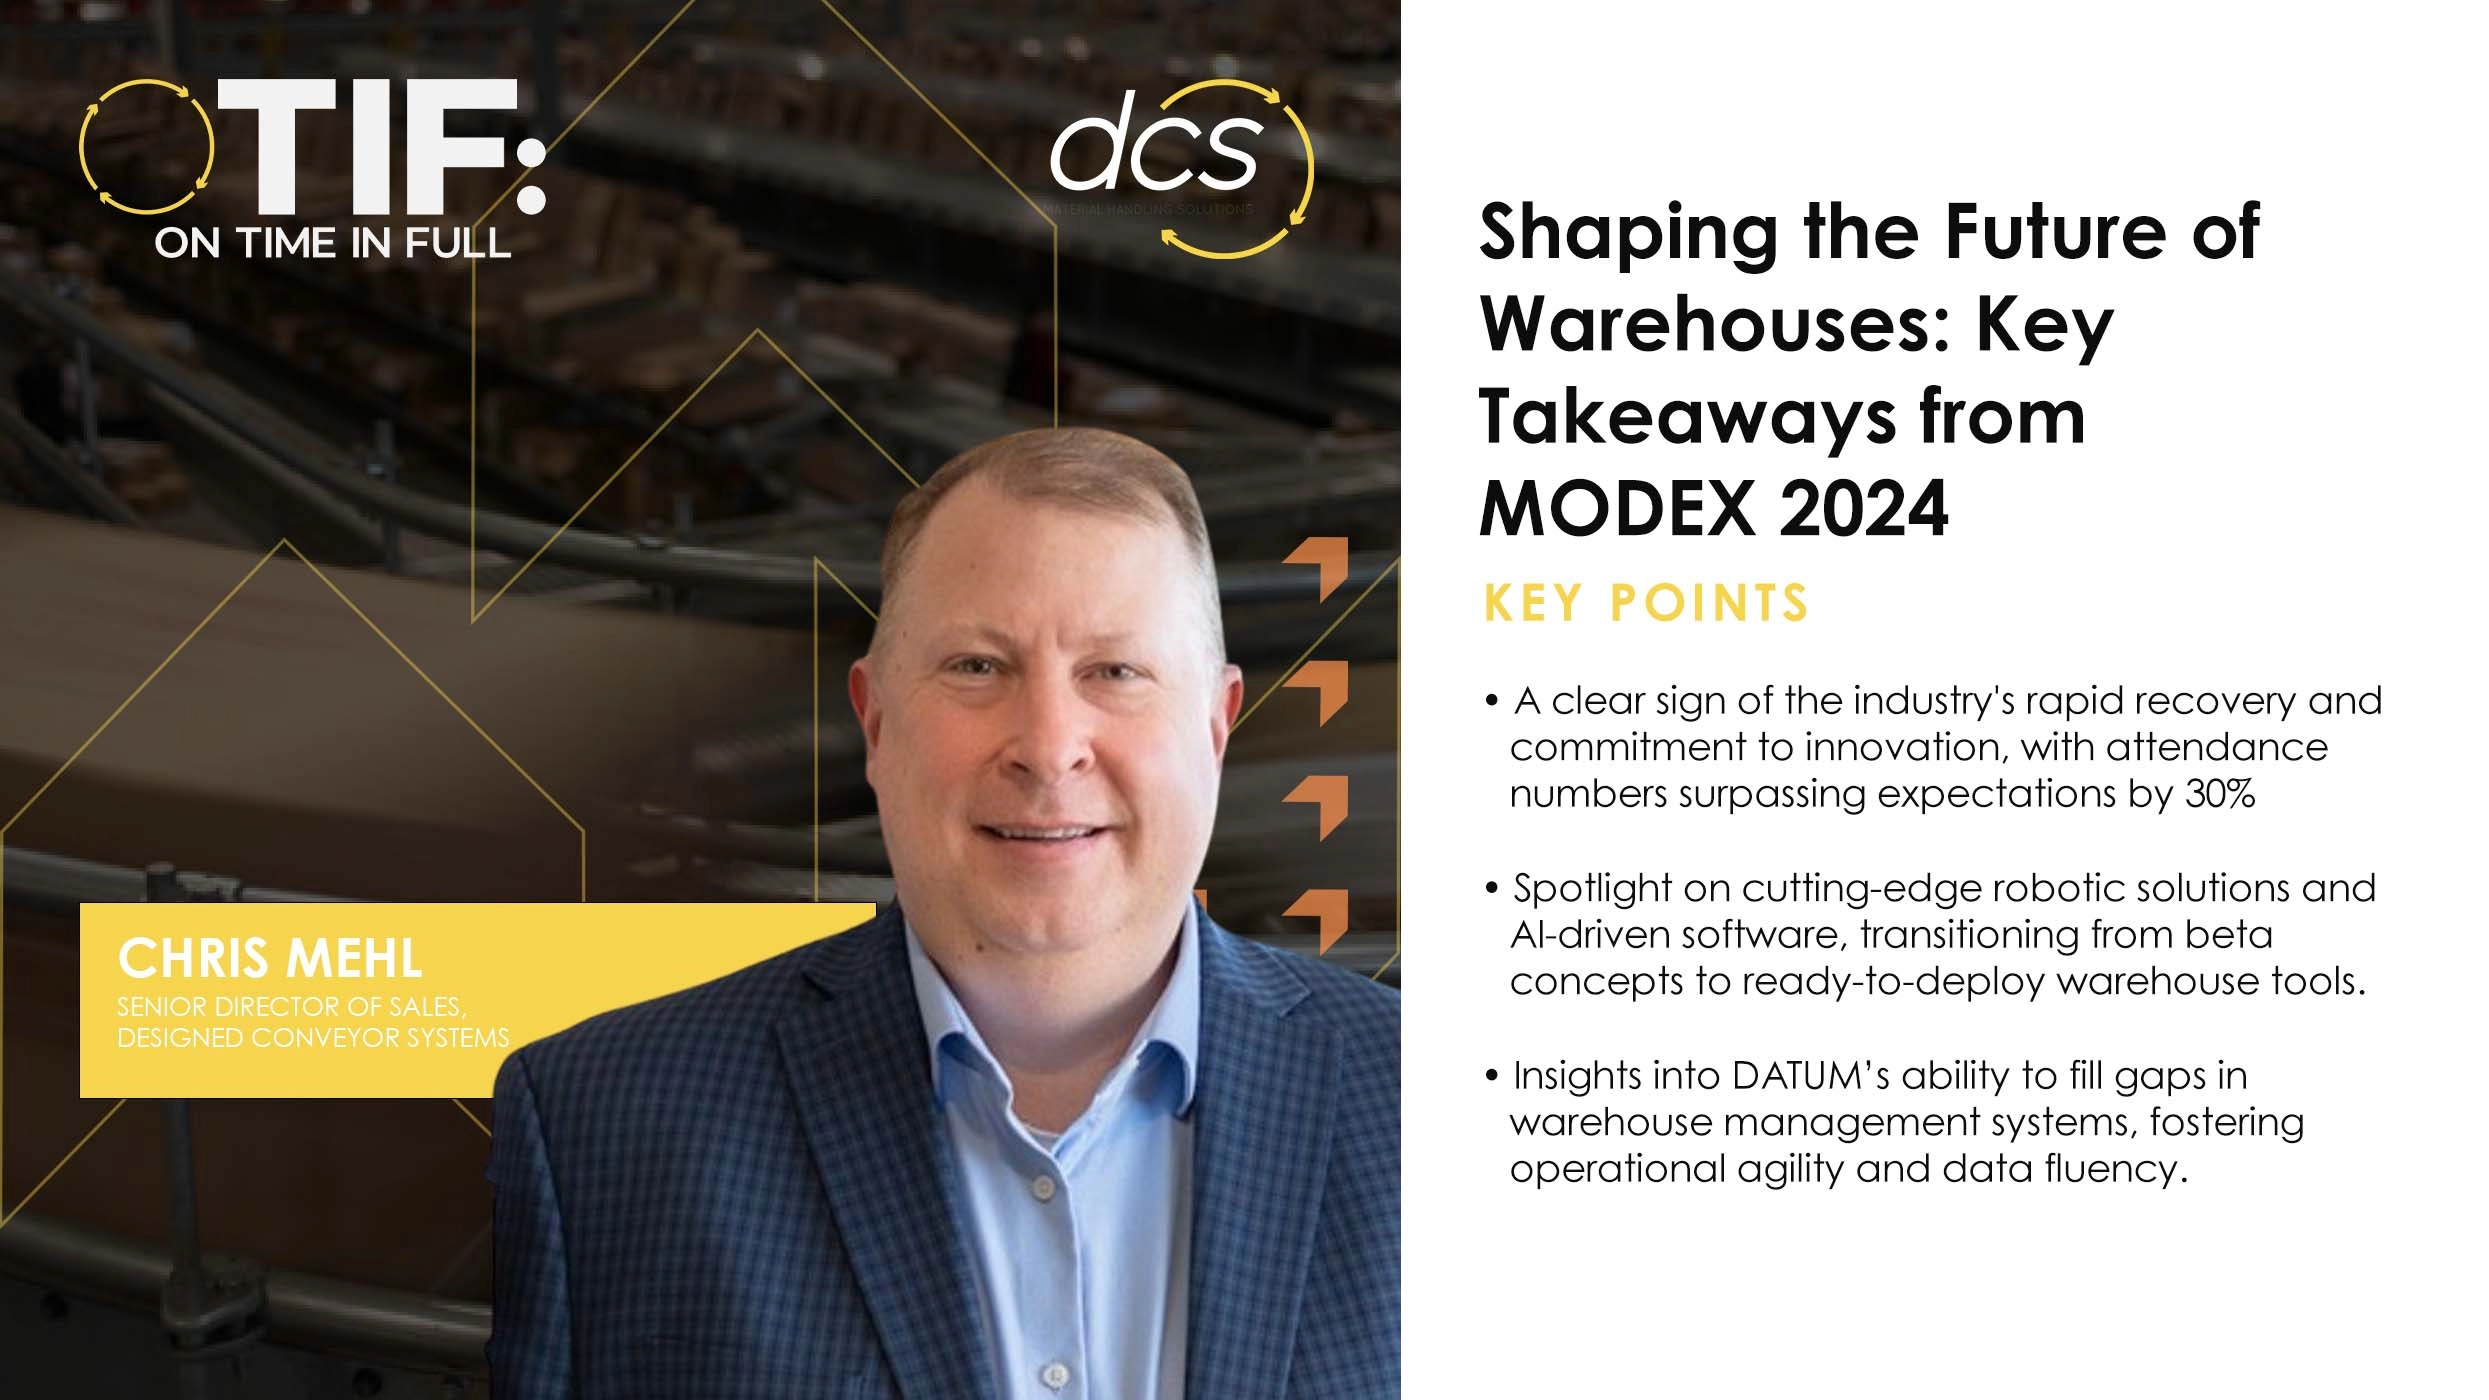 Shaping the Future of Warehouses: Key Takeaways from MODEX 2024